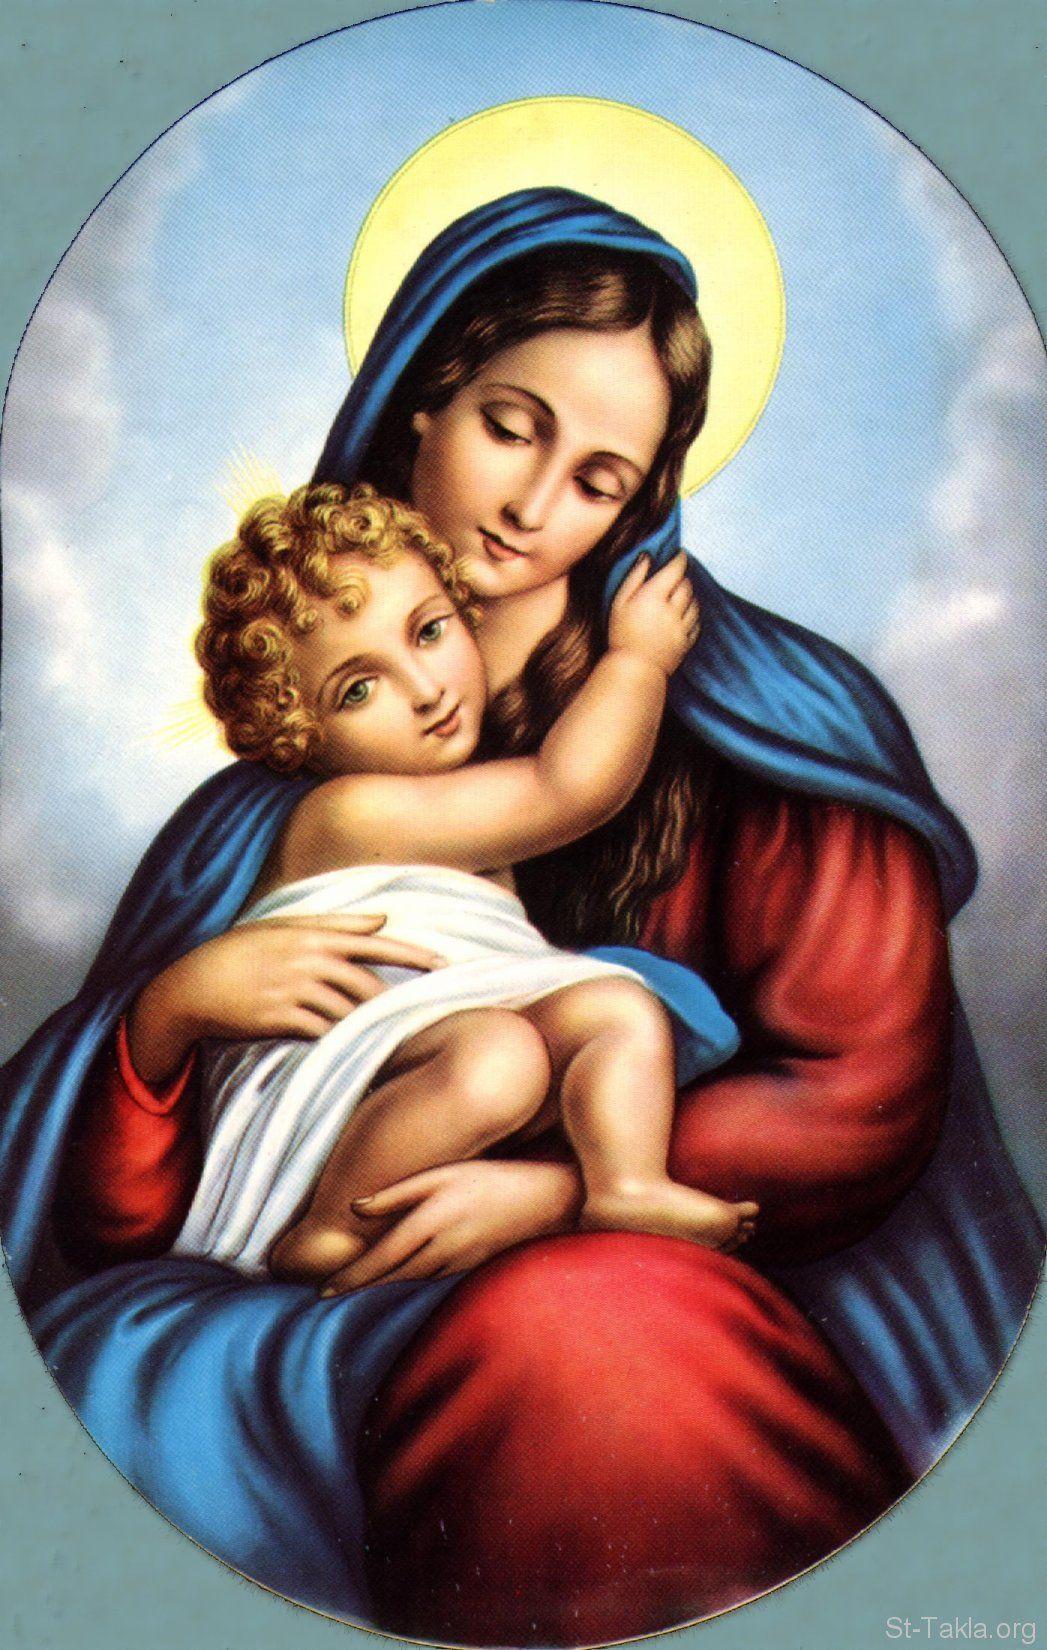 Mary wallpaper, Religious, HQ Mary pictureK Wallpaper